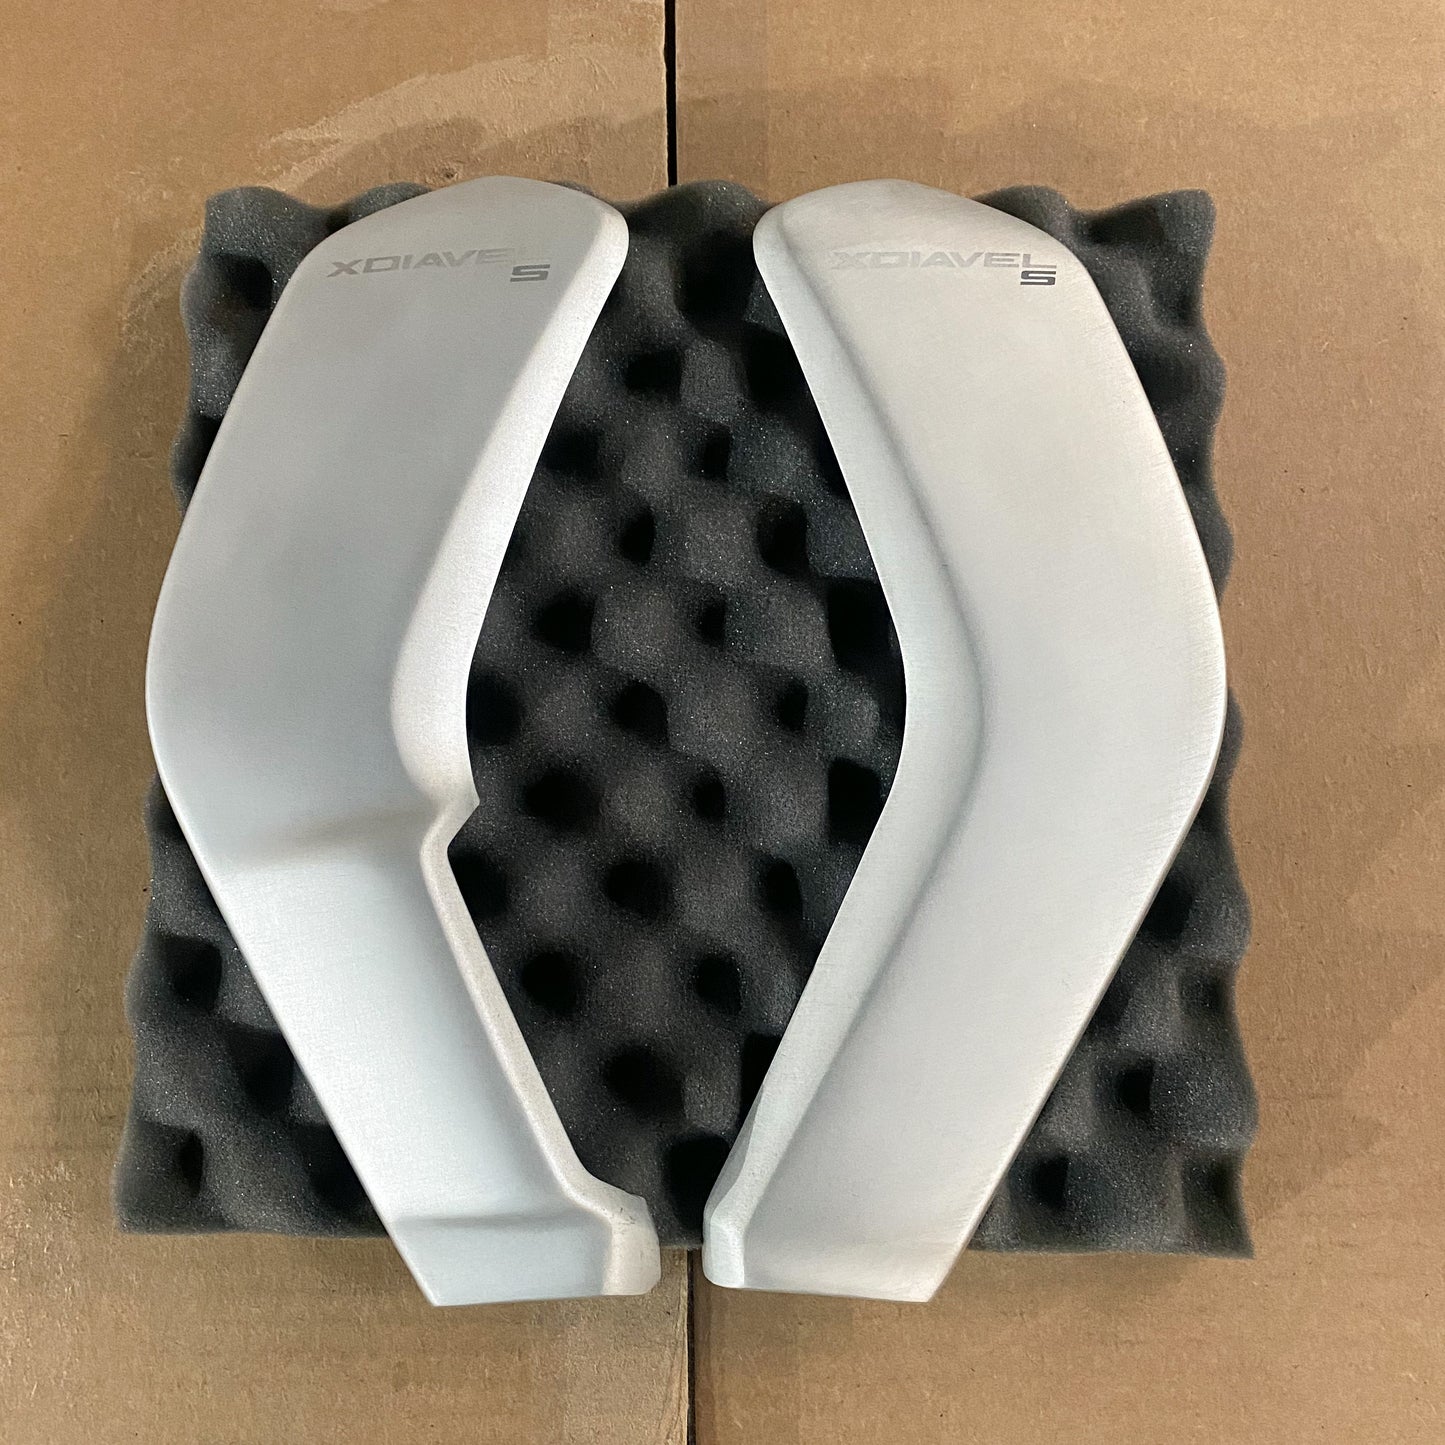 Ducati XDiavel S Left & Right Water Cooler Covers 48017731AB / 48017741AB